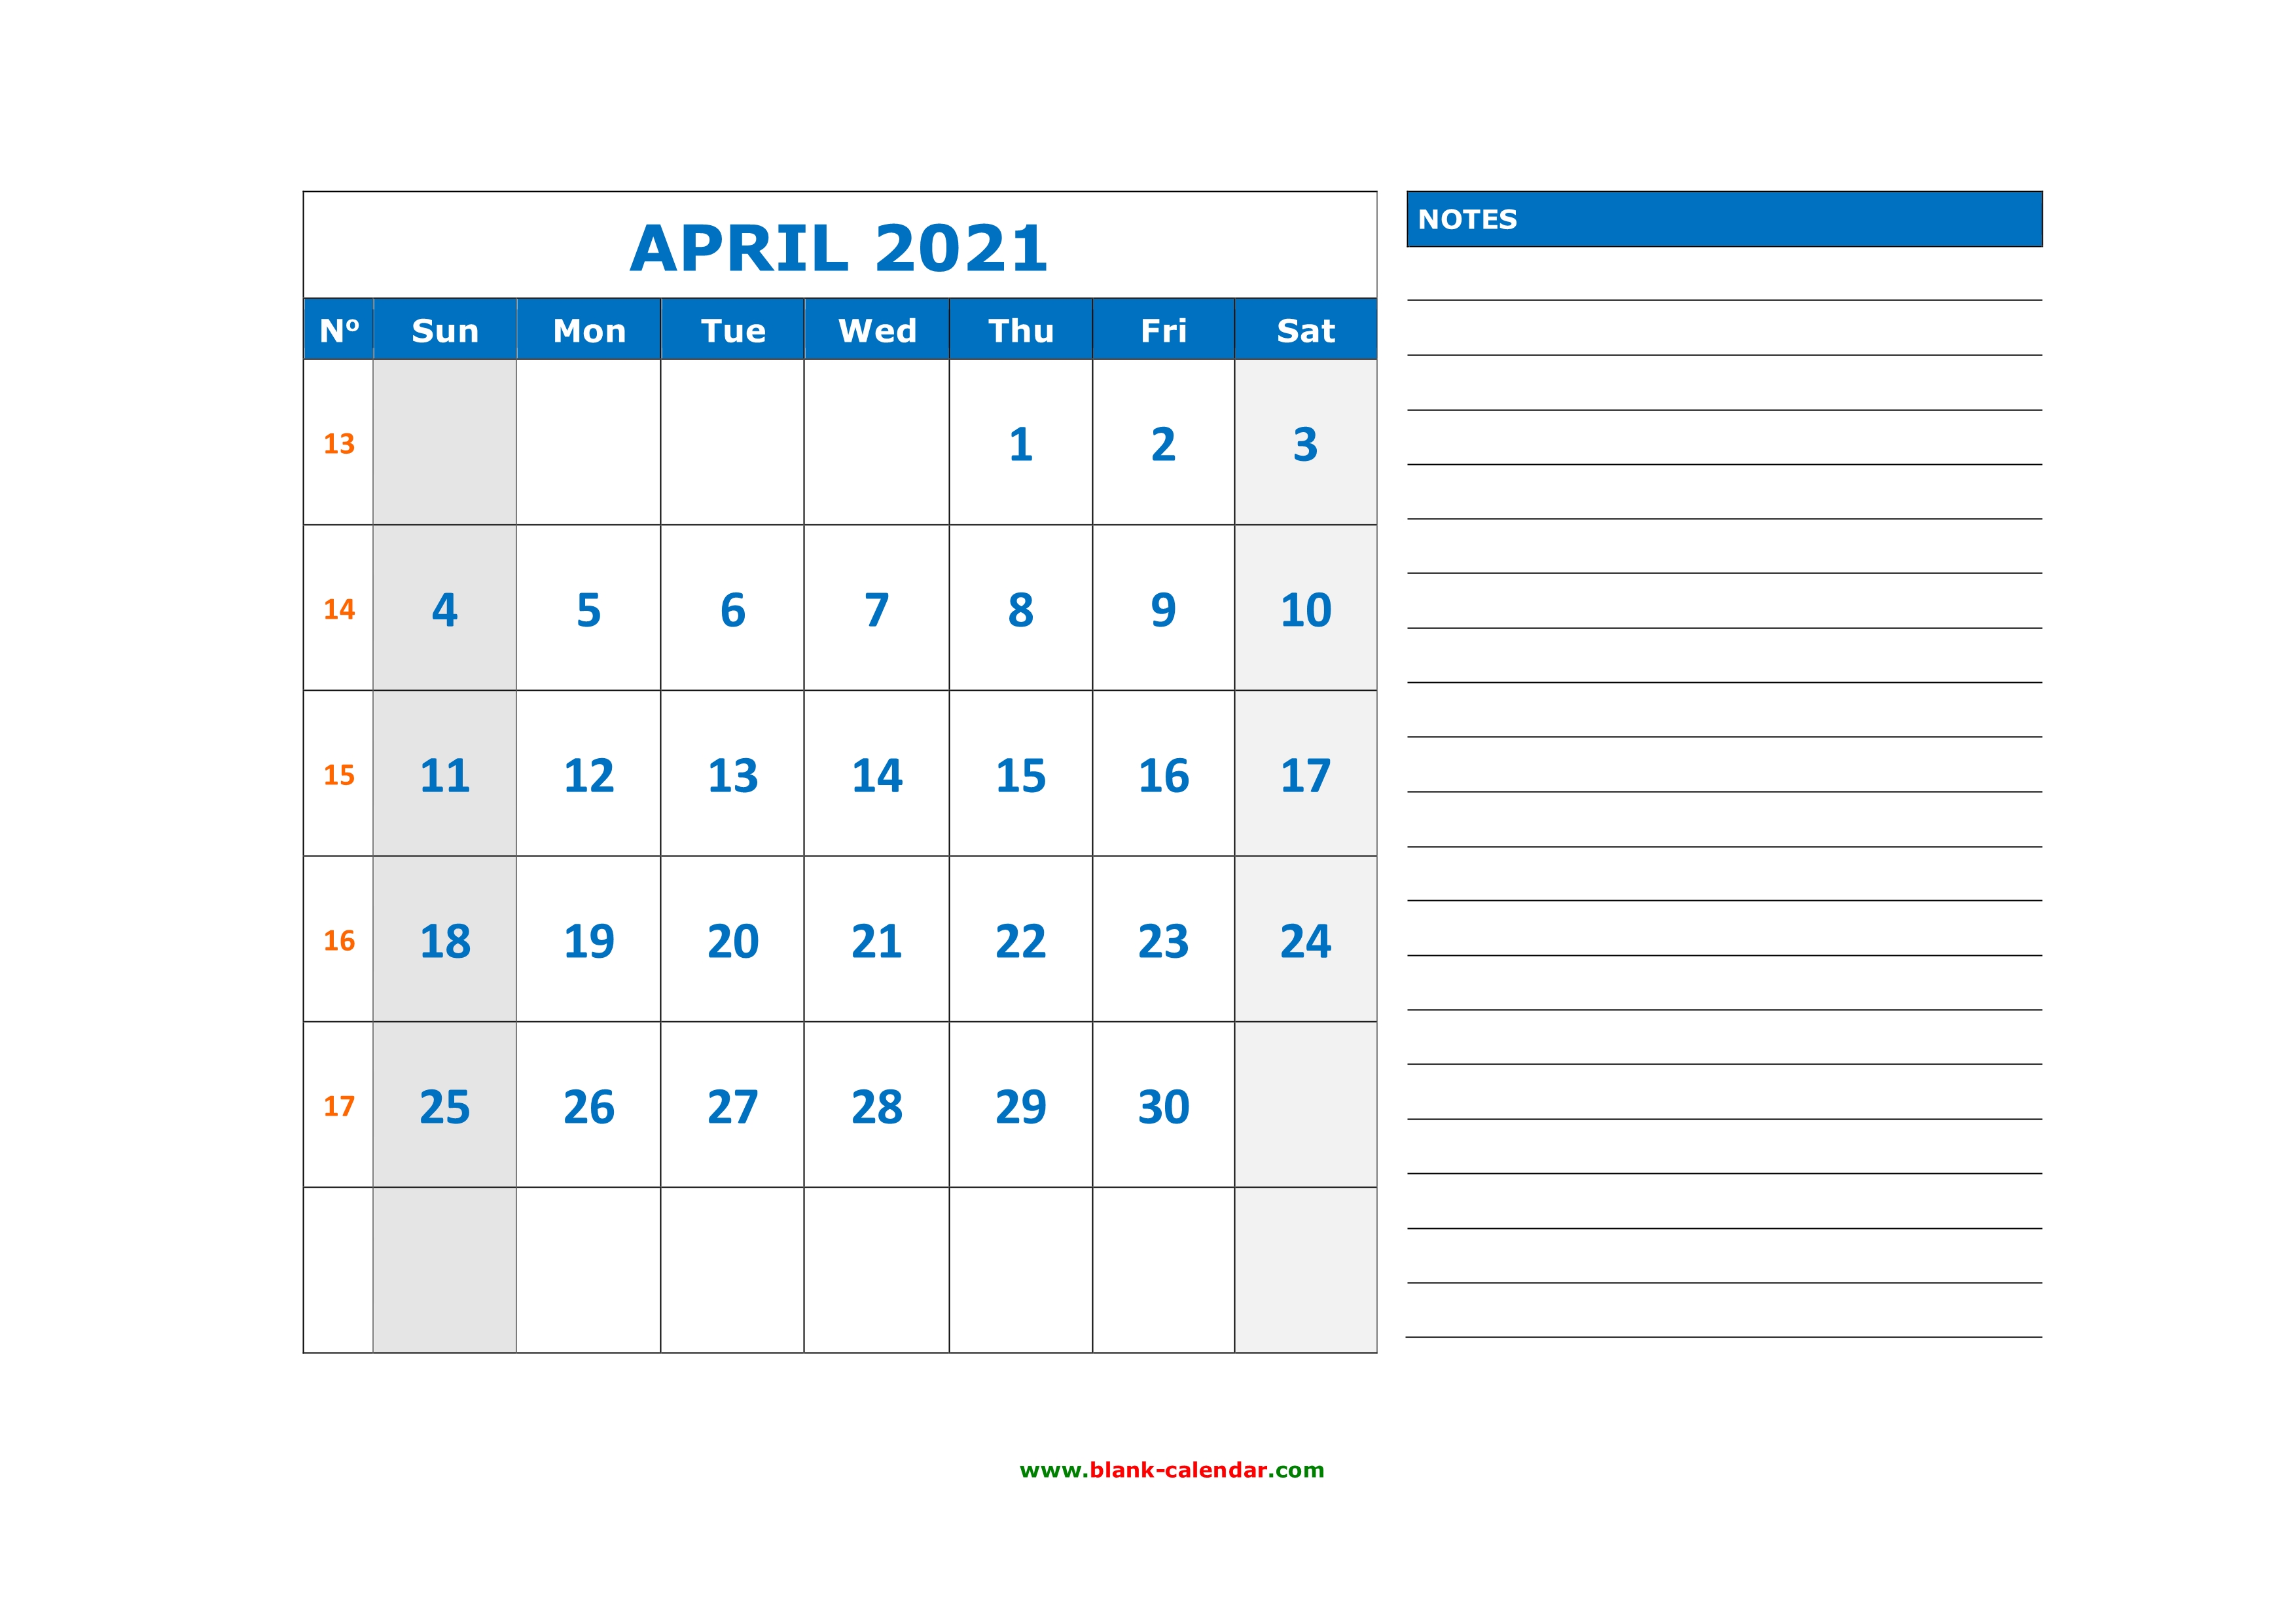 Free Download Printable April 2021 Calendar, large space for appointment and notes